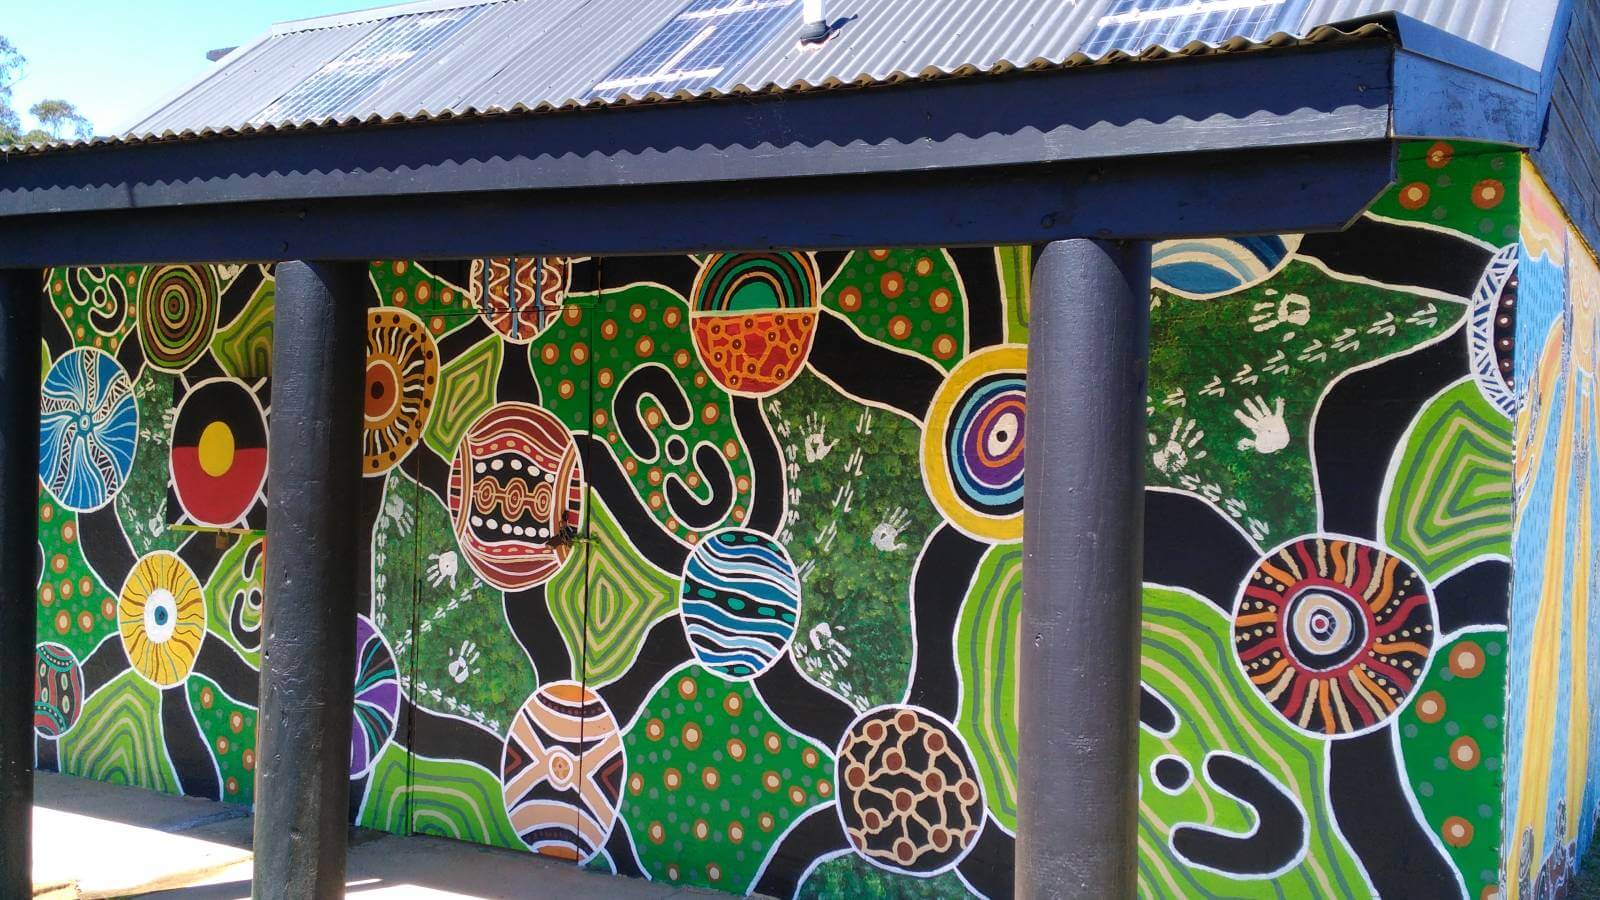 Image Artwork by Aboriginal artist Bronwen Smith featured on the the public toilet building at Mogo Recreation Park